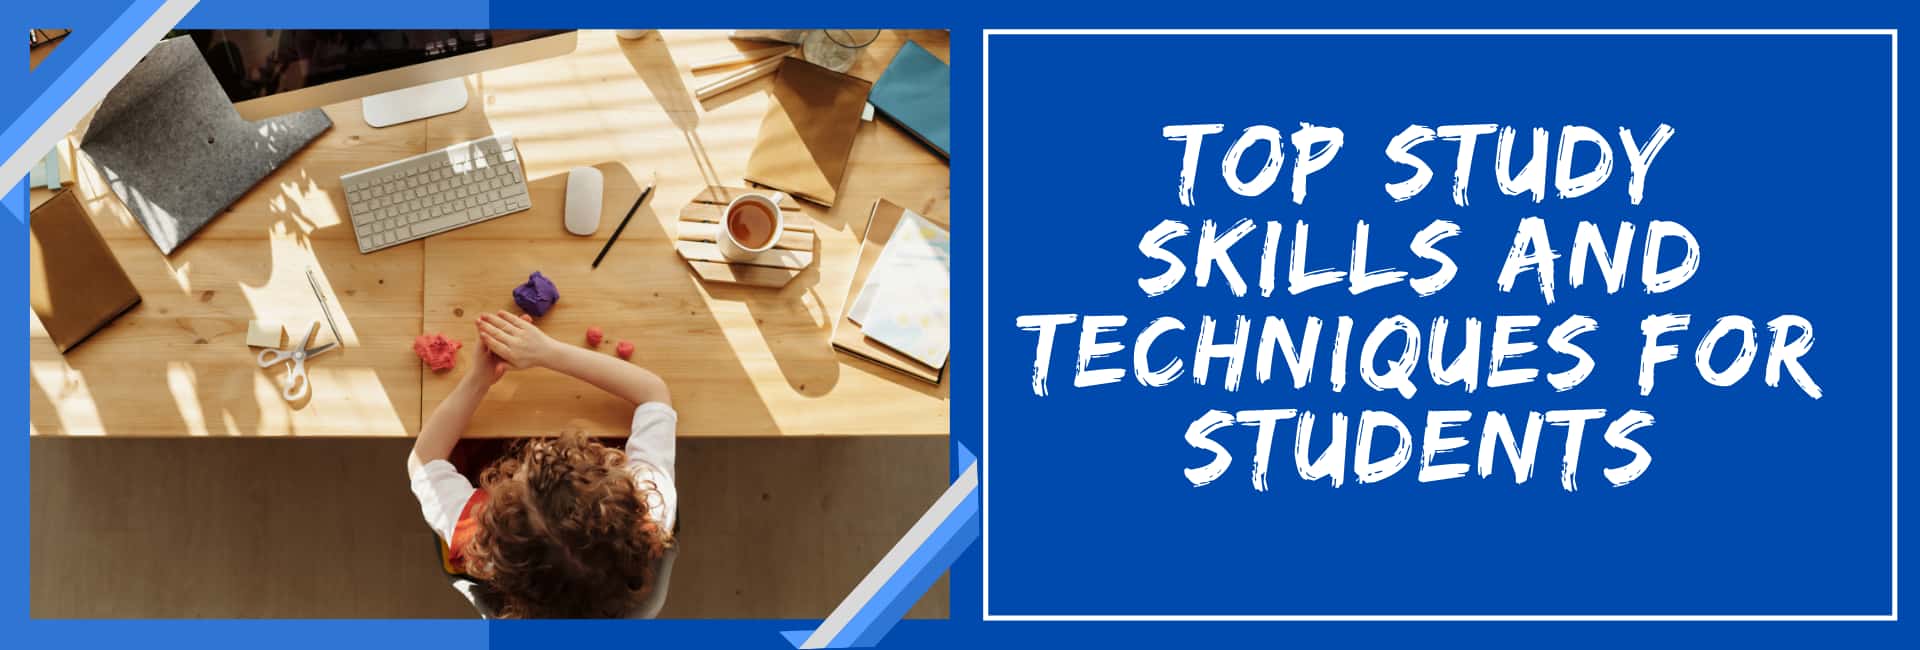 Top Study Skills And Techniques For Students